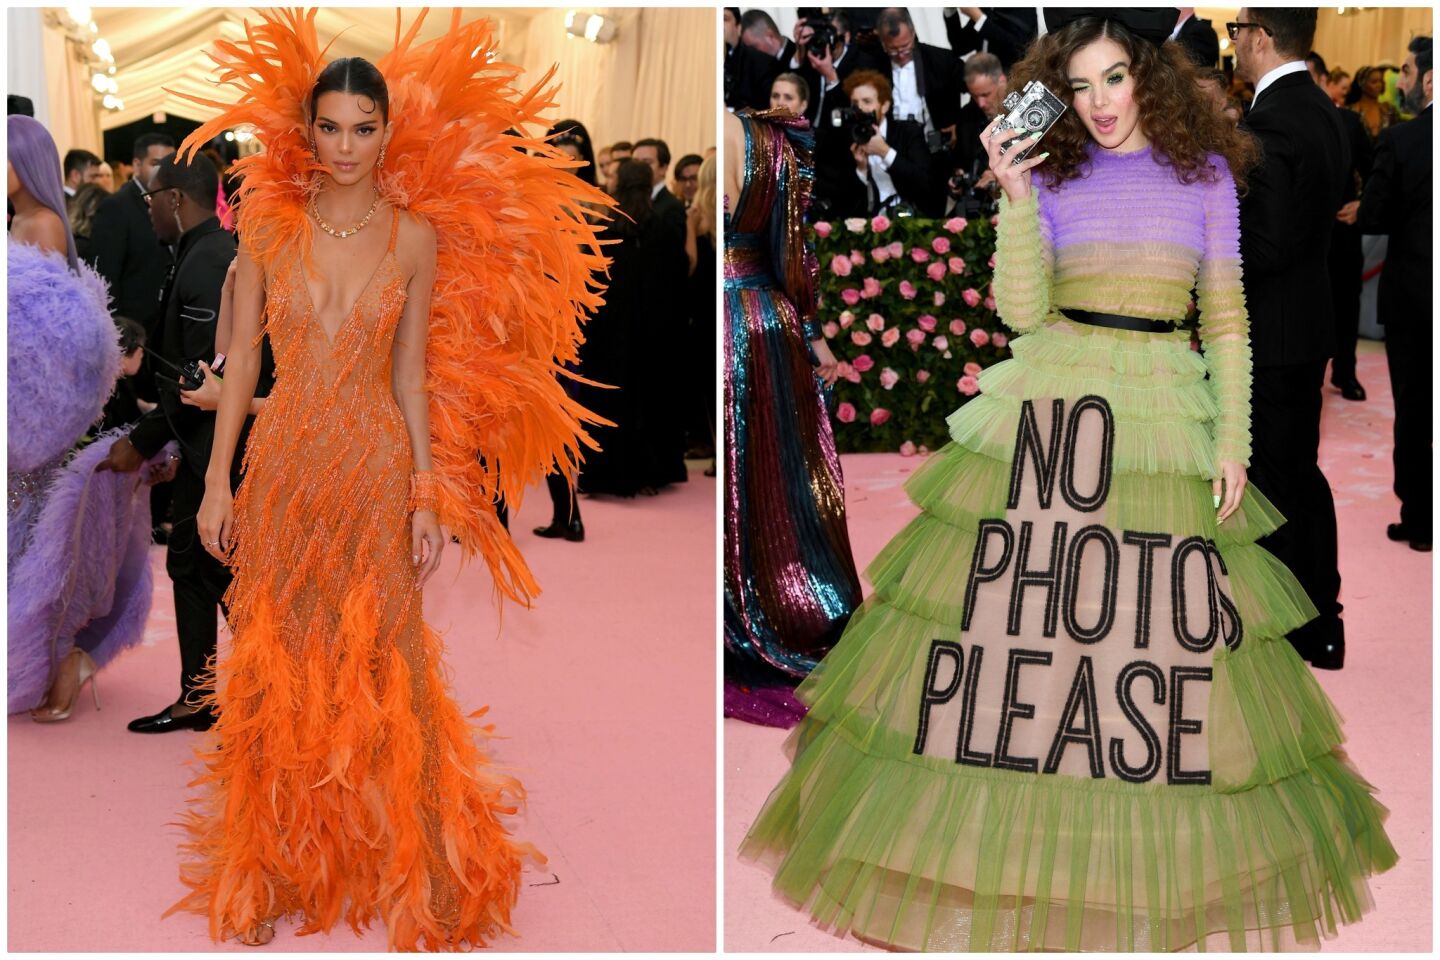 Kendall Jenner (in Versace), left, and Hailee Steinfeld (in Viktor & Rolf couture) at the 2019 Met Gala.